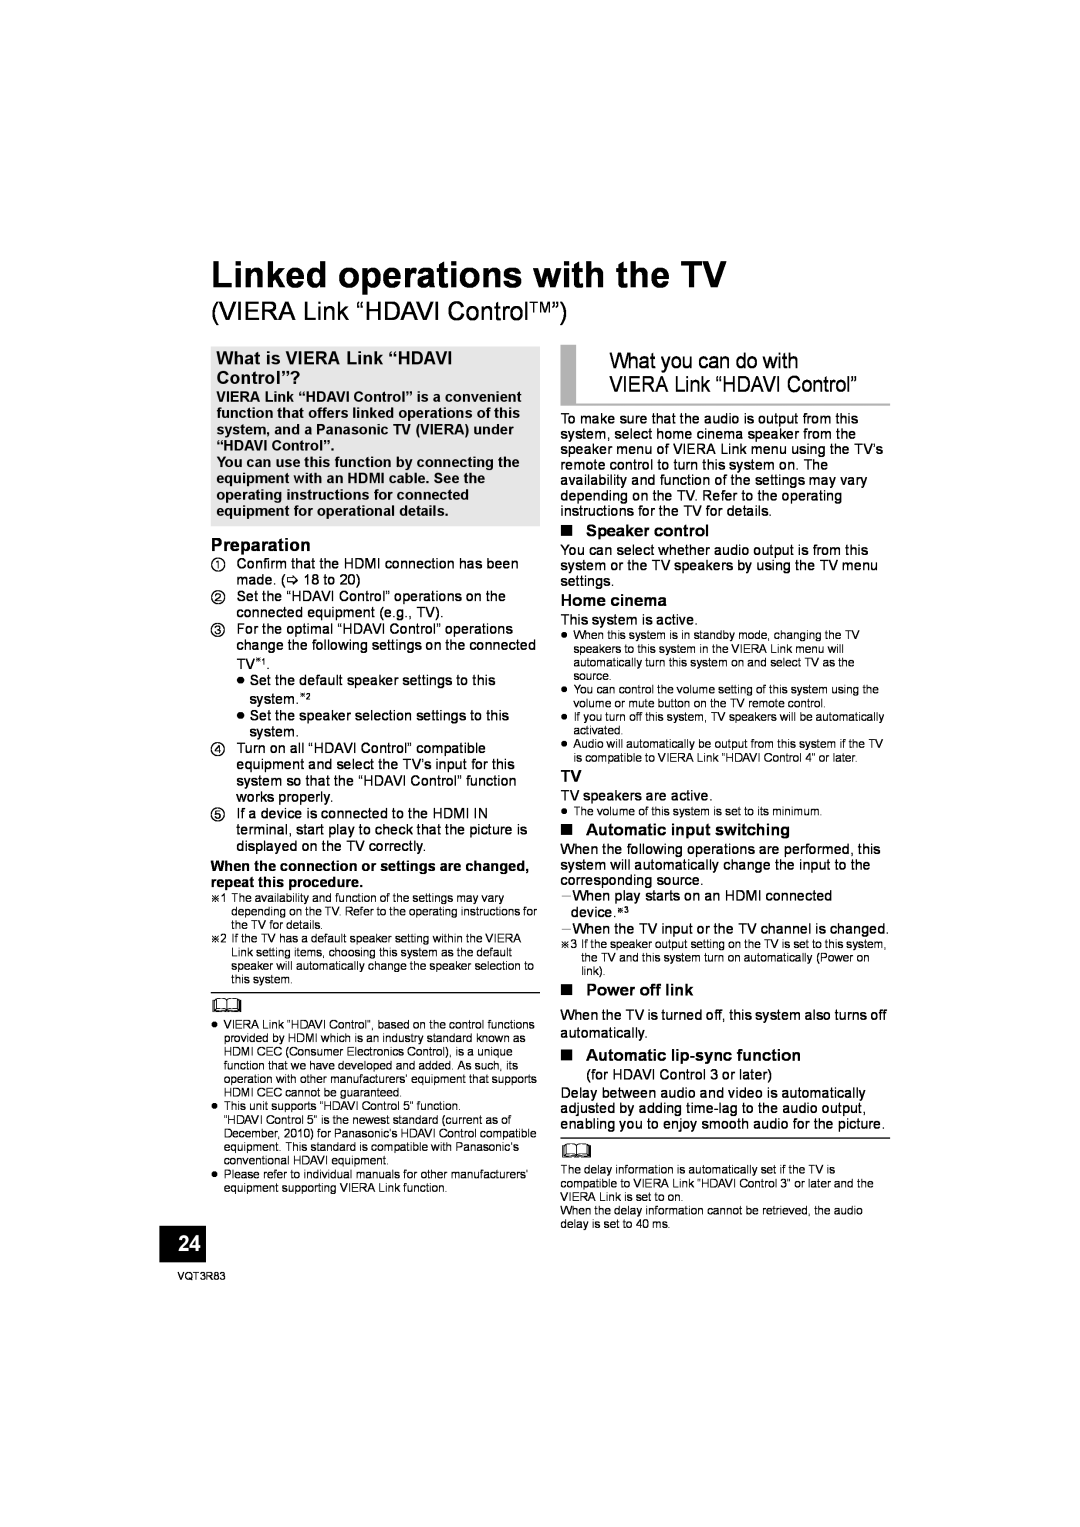 Panasonic SC-HTB15 Linked operations with the TV, VIERA Link “HDAVI ControlTM”, What is VIERA Link “HDAVI Control”? 